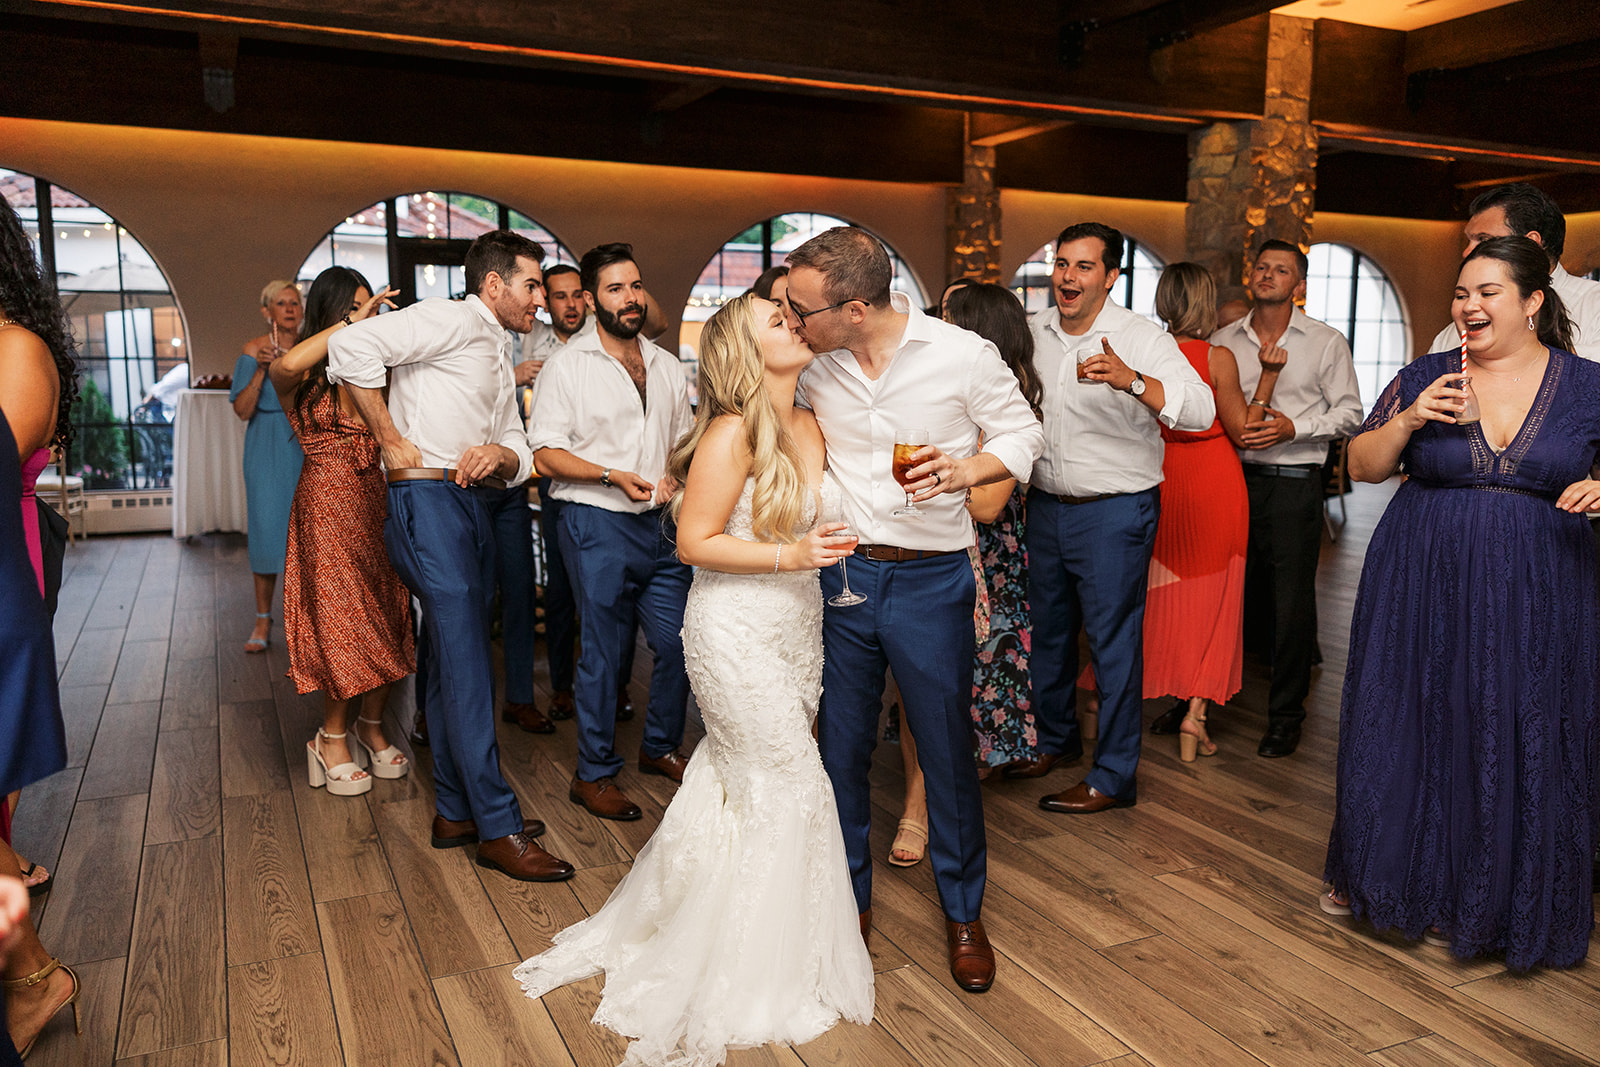 Newlyweds kiss while surrounded by guests holding drinks at their The Reserve At Perona Farms wedding reception